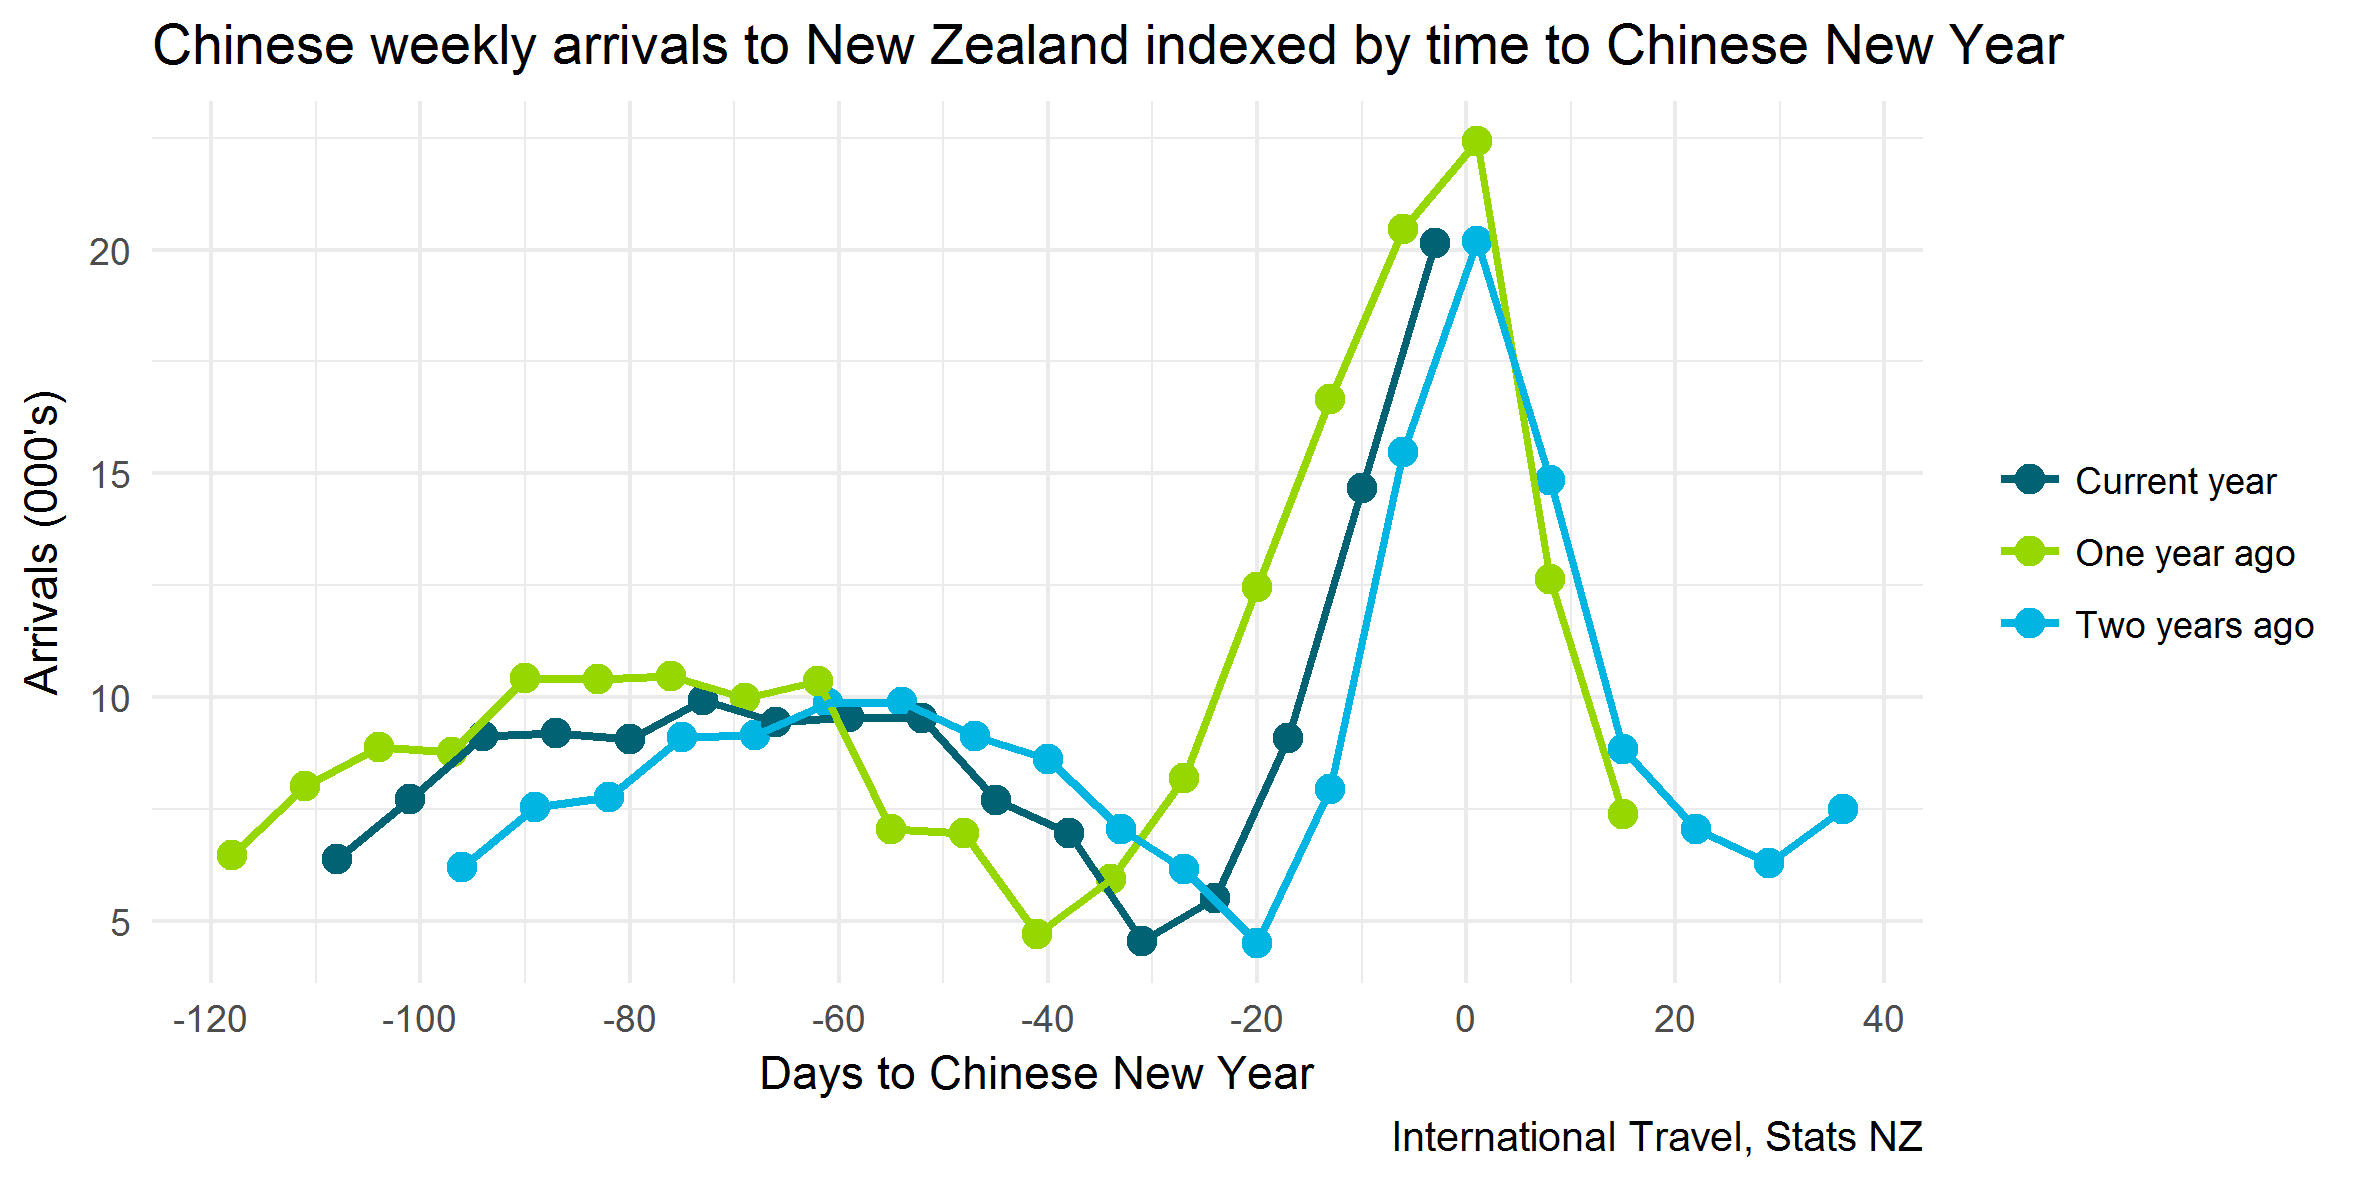 Chinese weekly arrivals in years 2017, 2018 and 2019, indexed by time to Chinese New Year